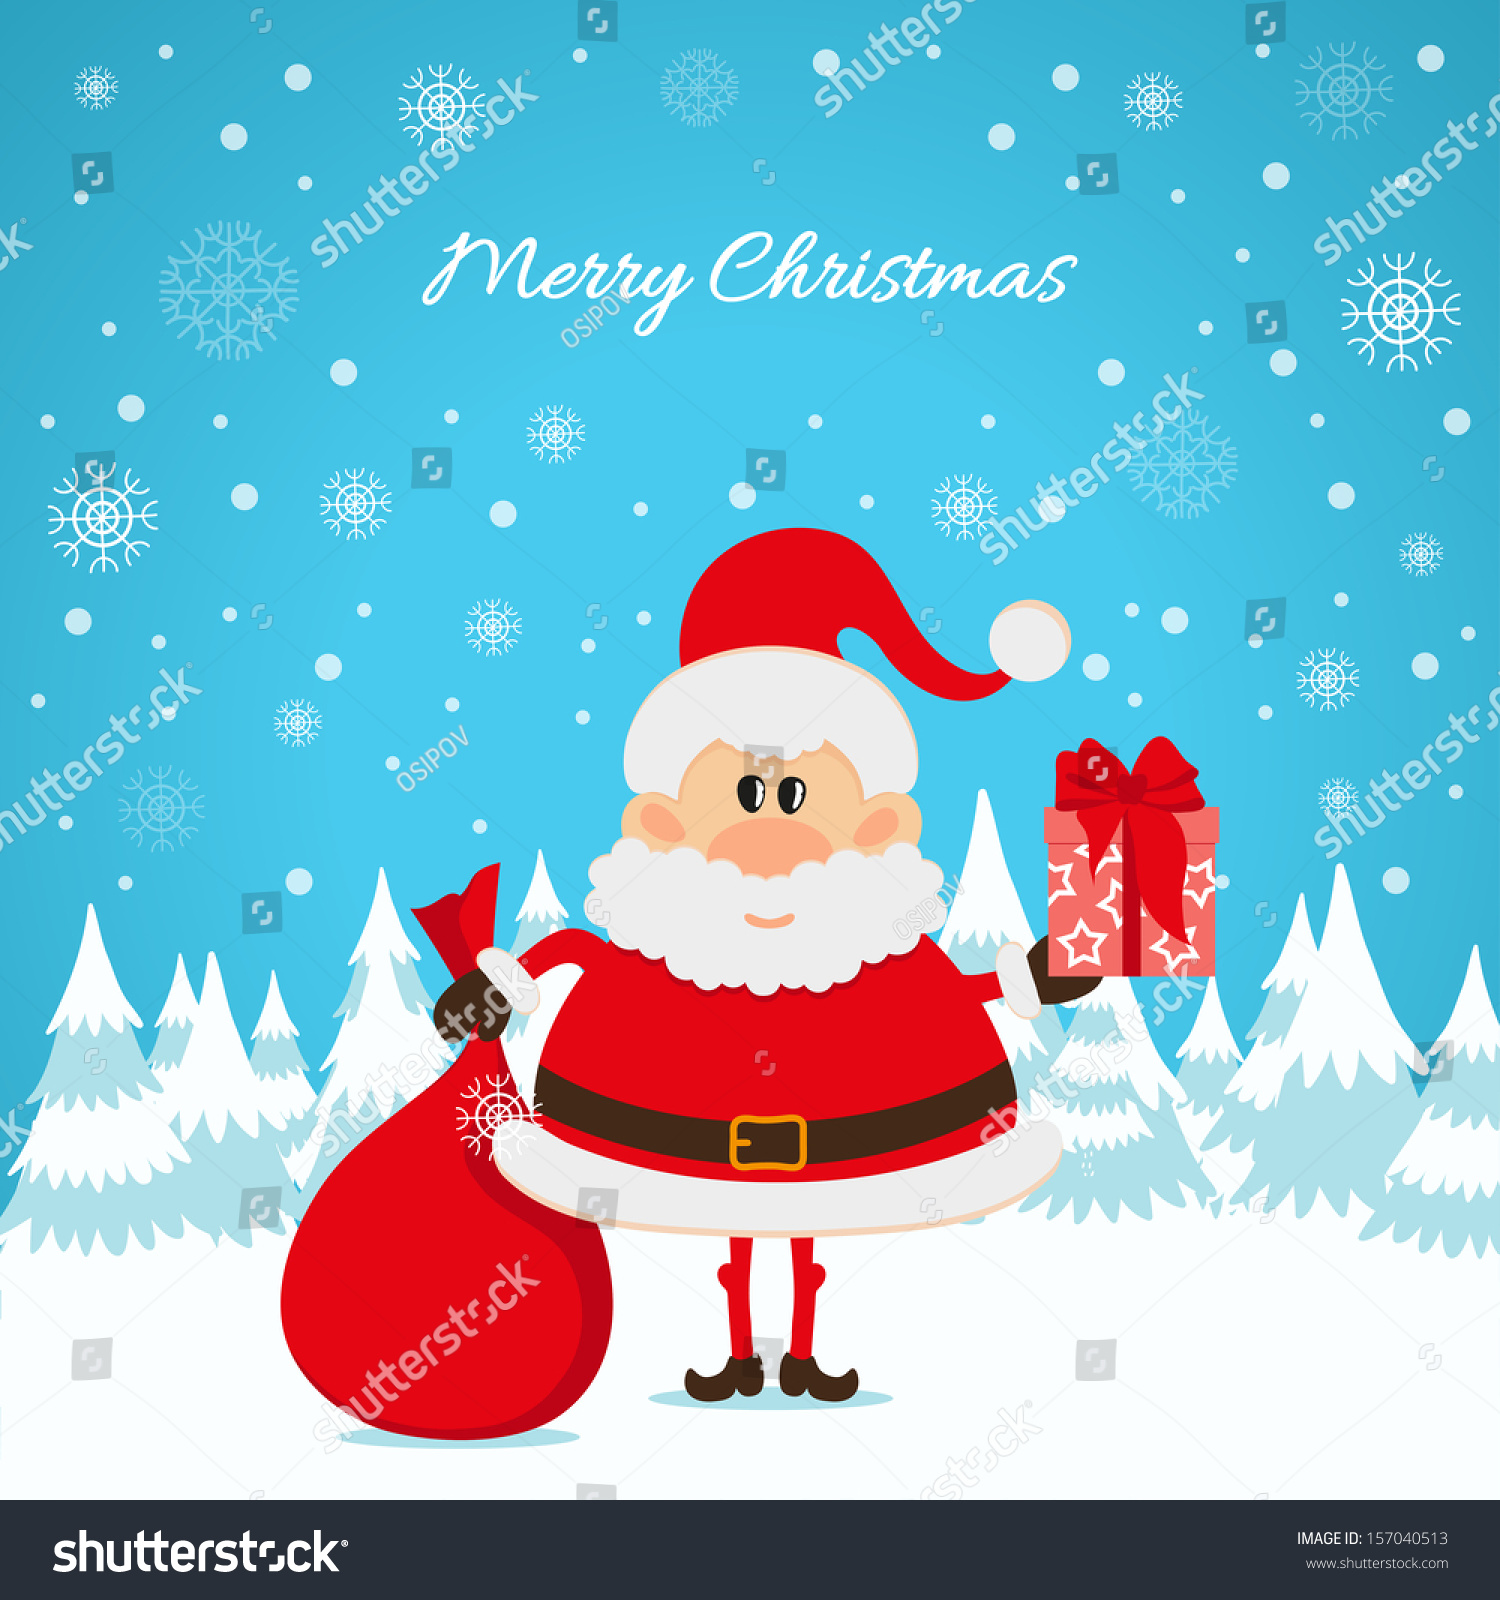 Vector cartoon illustration of Santa Claus and his bag with presents Concept of Merry Christmas and Happy New Year